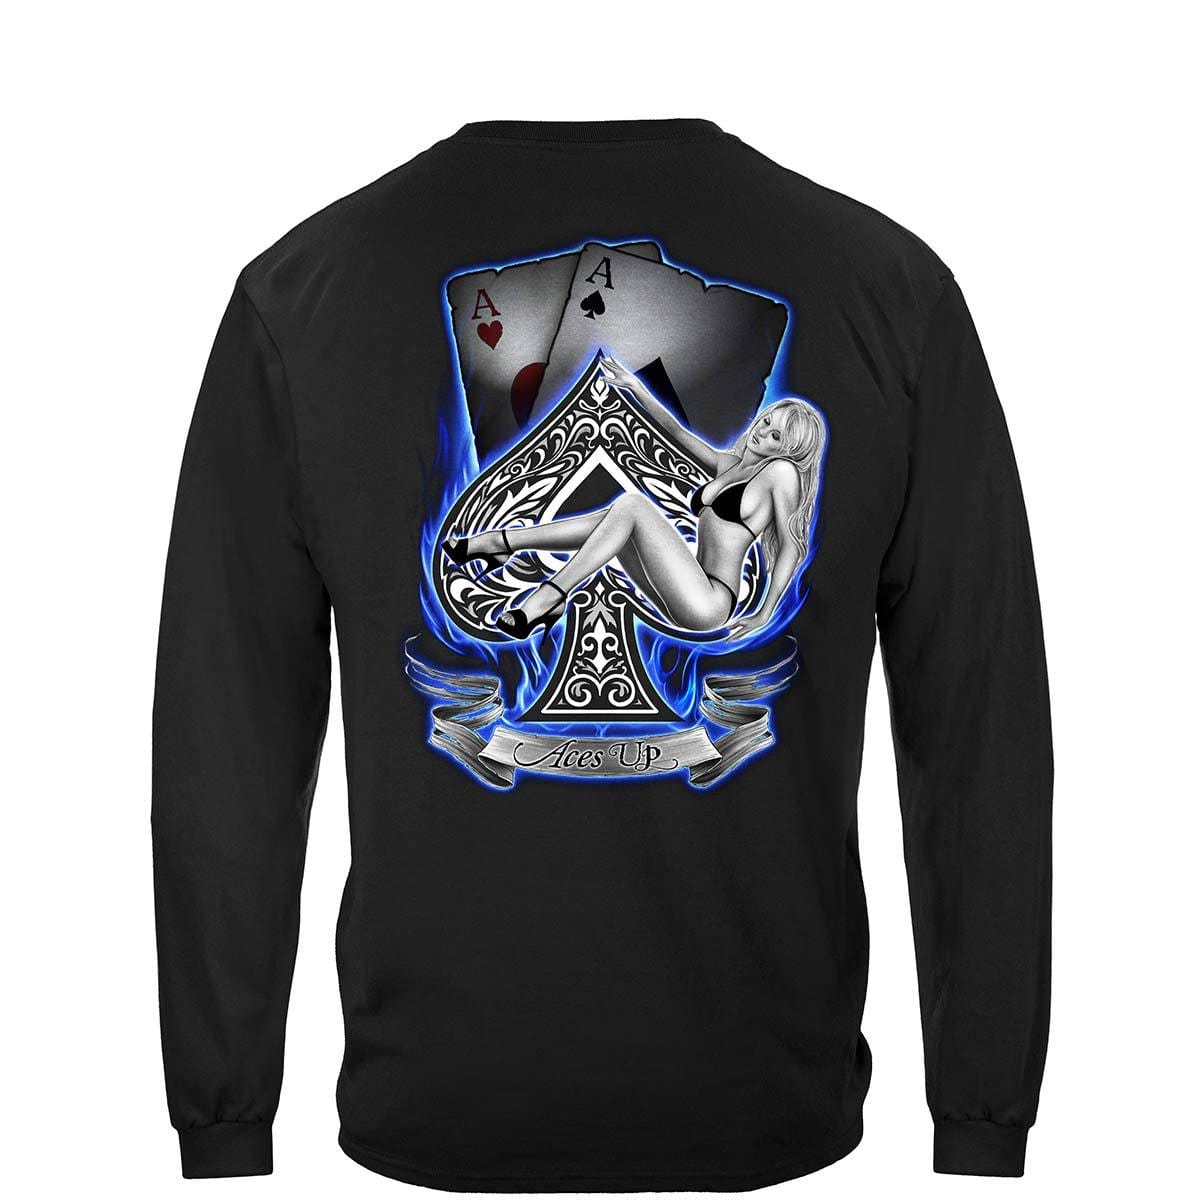 Aces Up Premium Long Sleeves